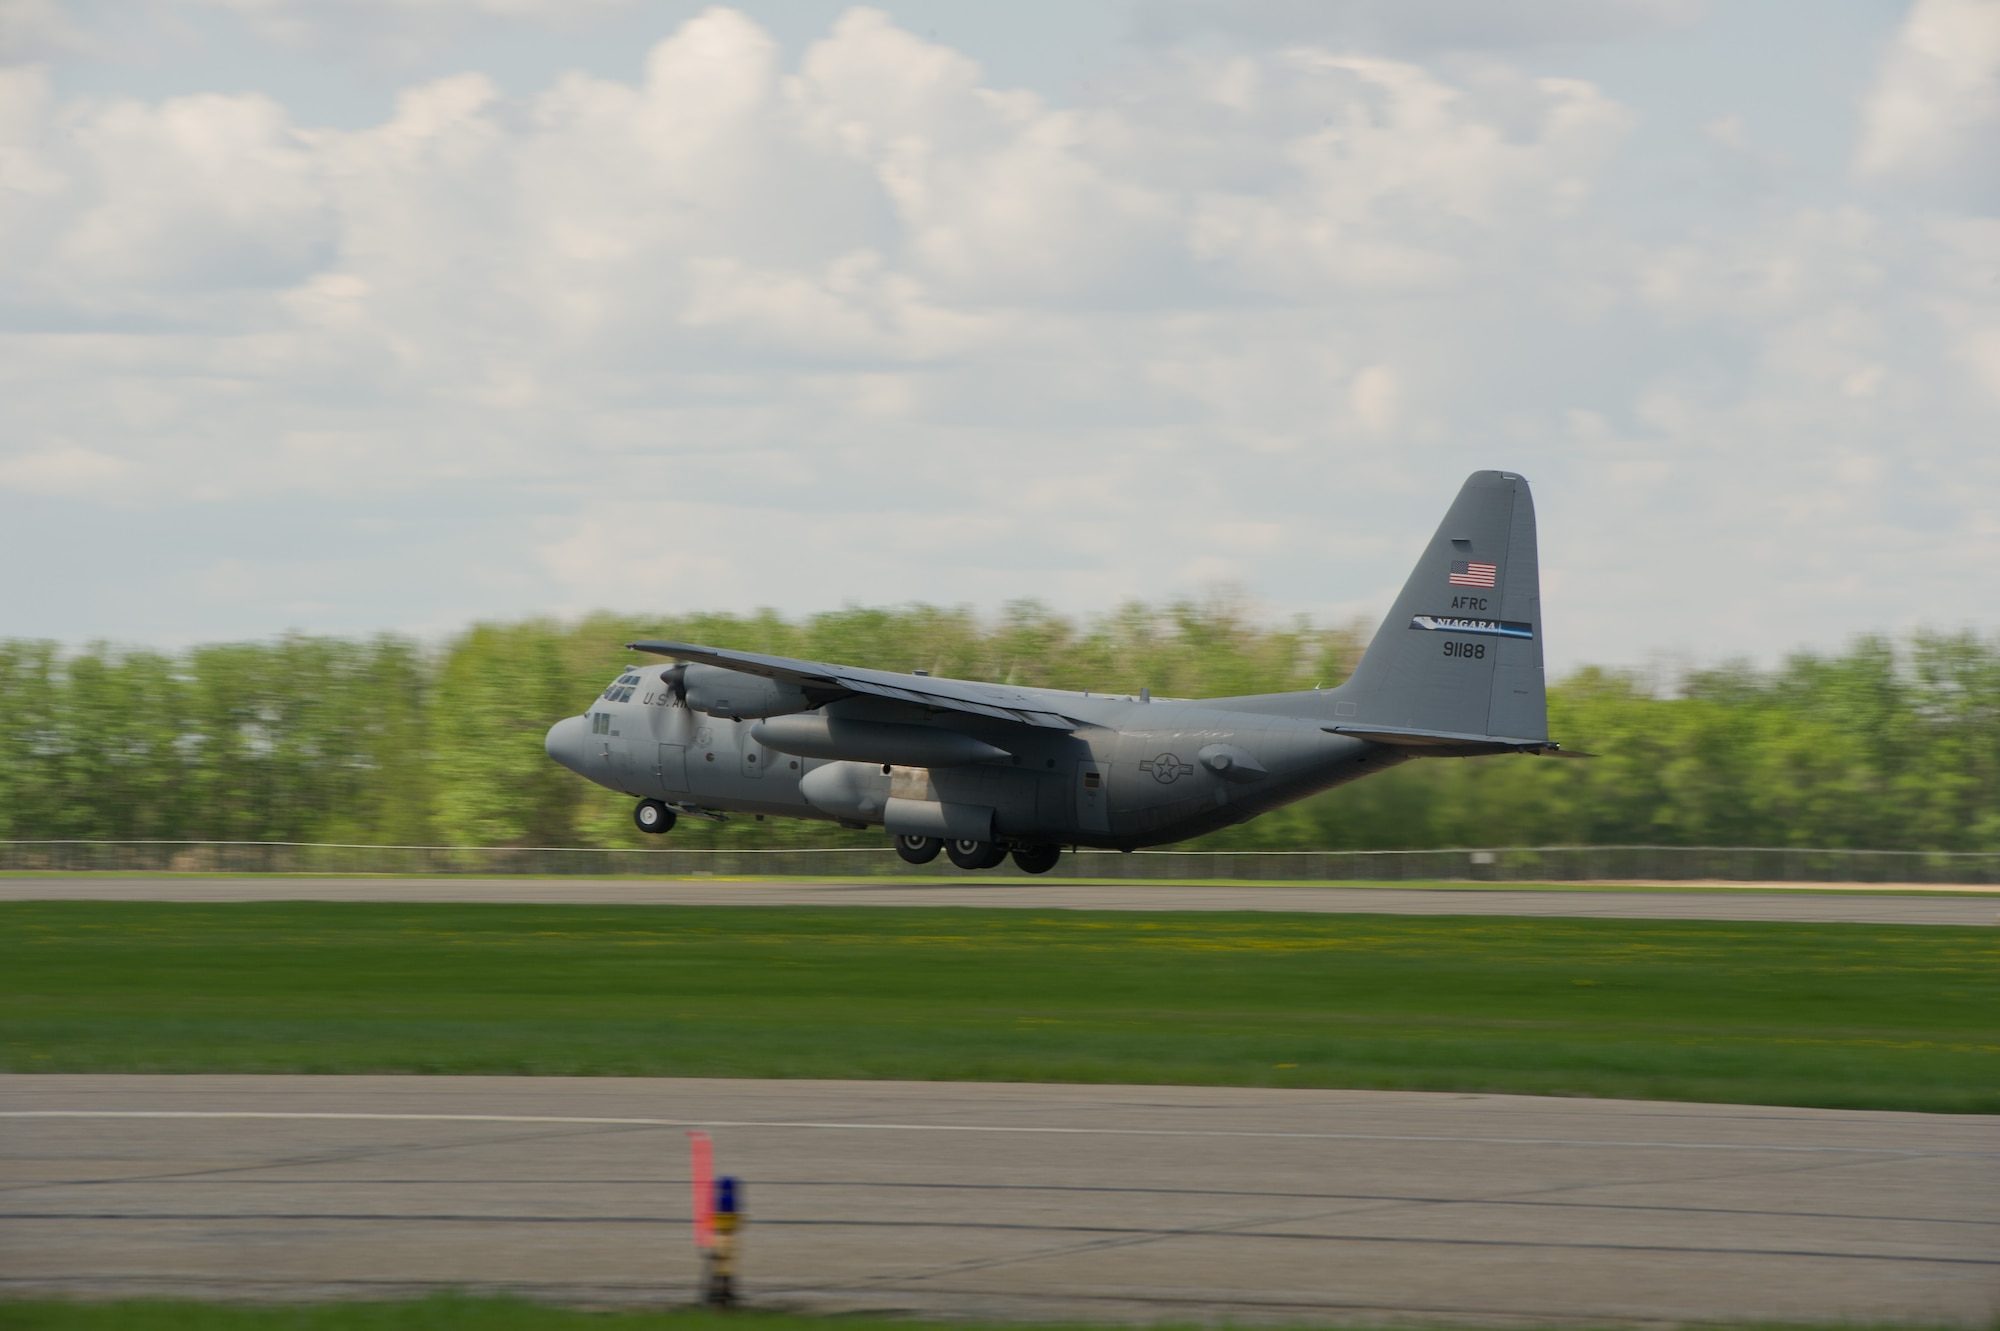 A U.S. Air Force C-130H Hercules aircraft from the 914th Airlift Wing, Niagara Falls Air Reserve Station, N.Y., takes off during Maple Flag 47 in Edmonton/Cold Lake, Alberta, Canada, May 30, 2014. Maple Flag is an international exercise designed to enhance the interoperability of C-130 aircrews, maintainers and support specialists in a simulated combat environment. (U.S. Air Force photo by Tech. Sgt. Matthew Smith)